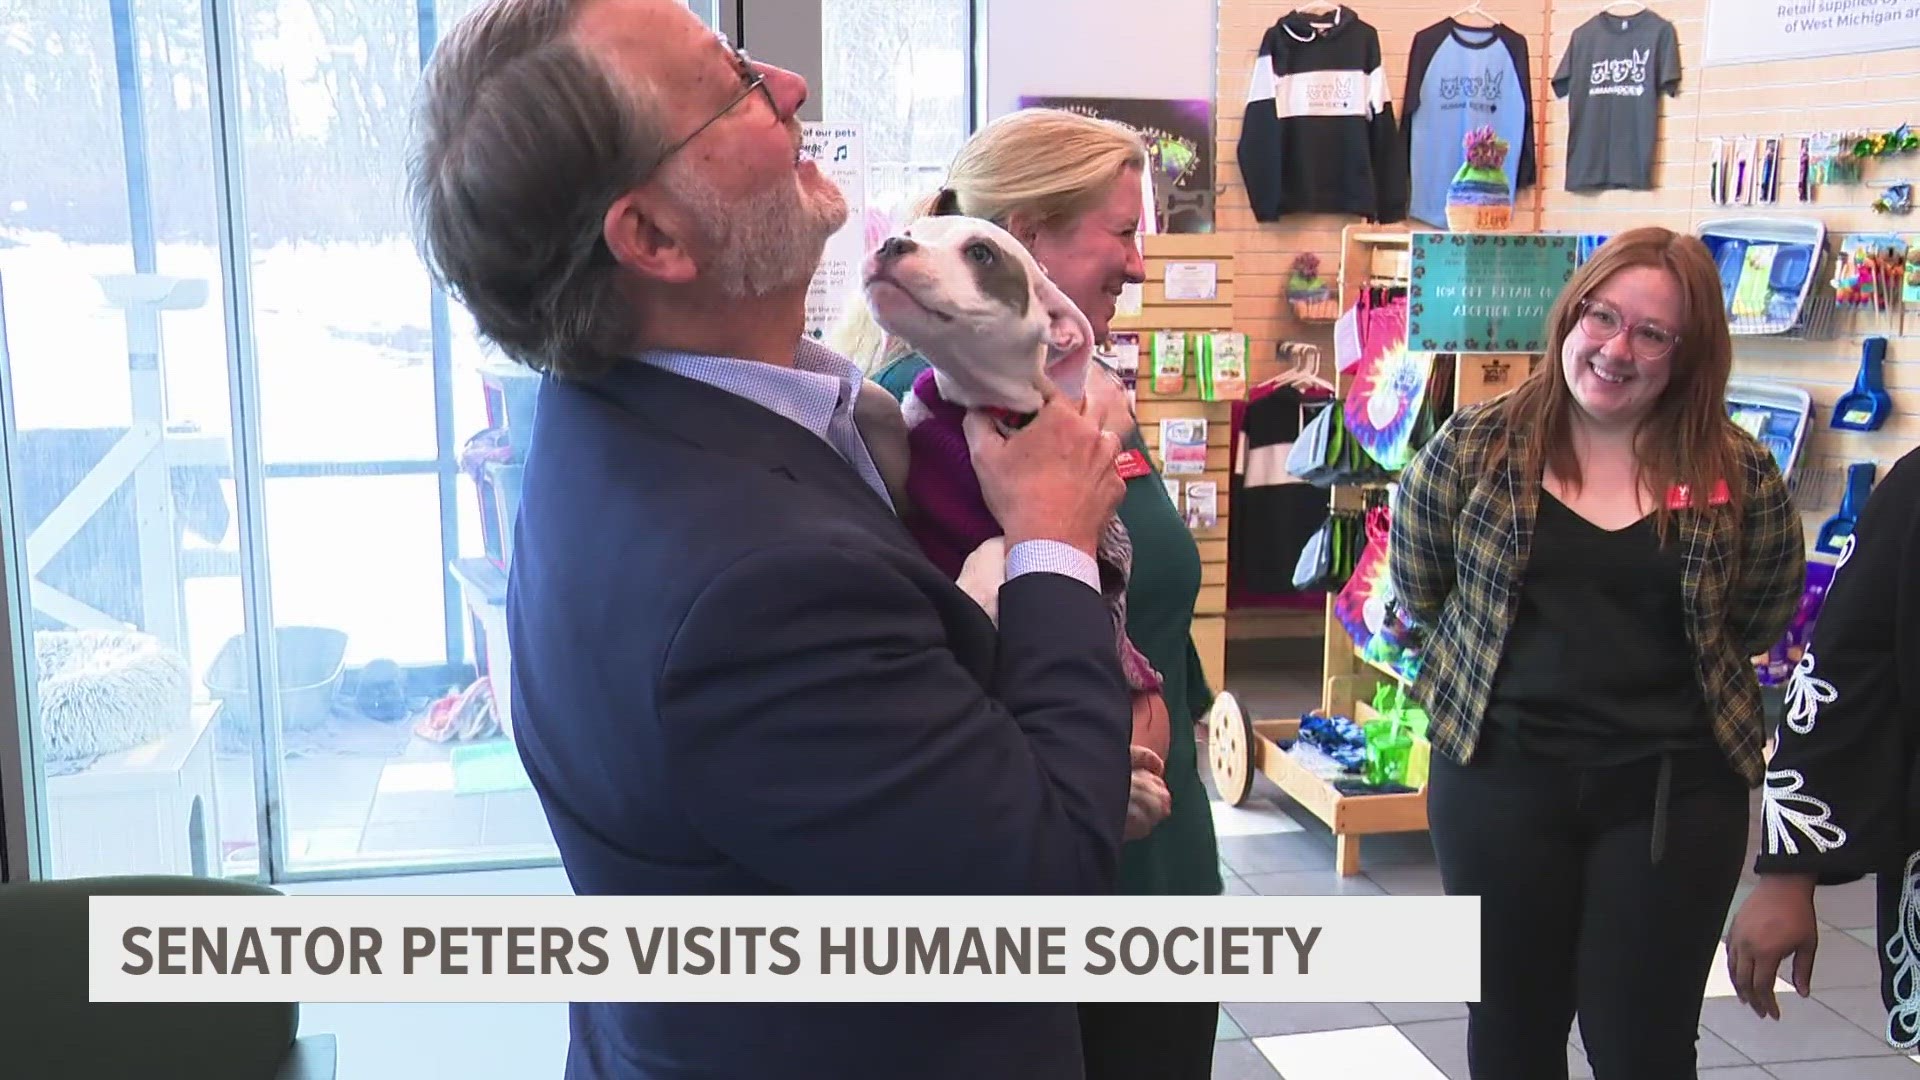 Peters visited to highlight the need for support for domestic violence survivors and their pets.